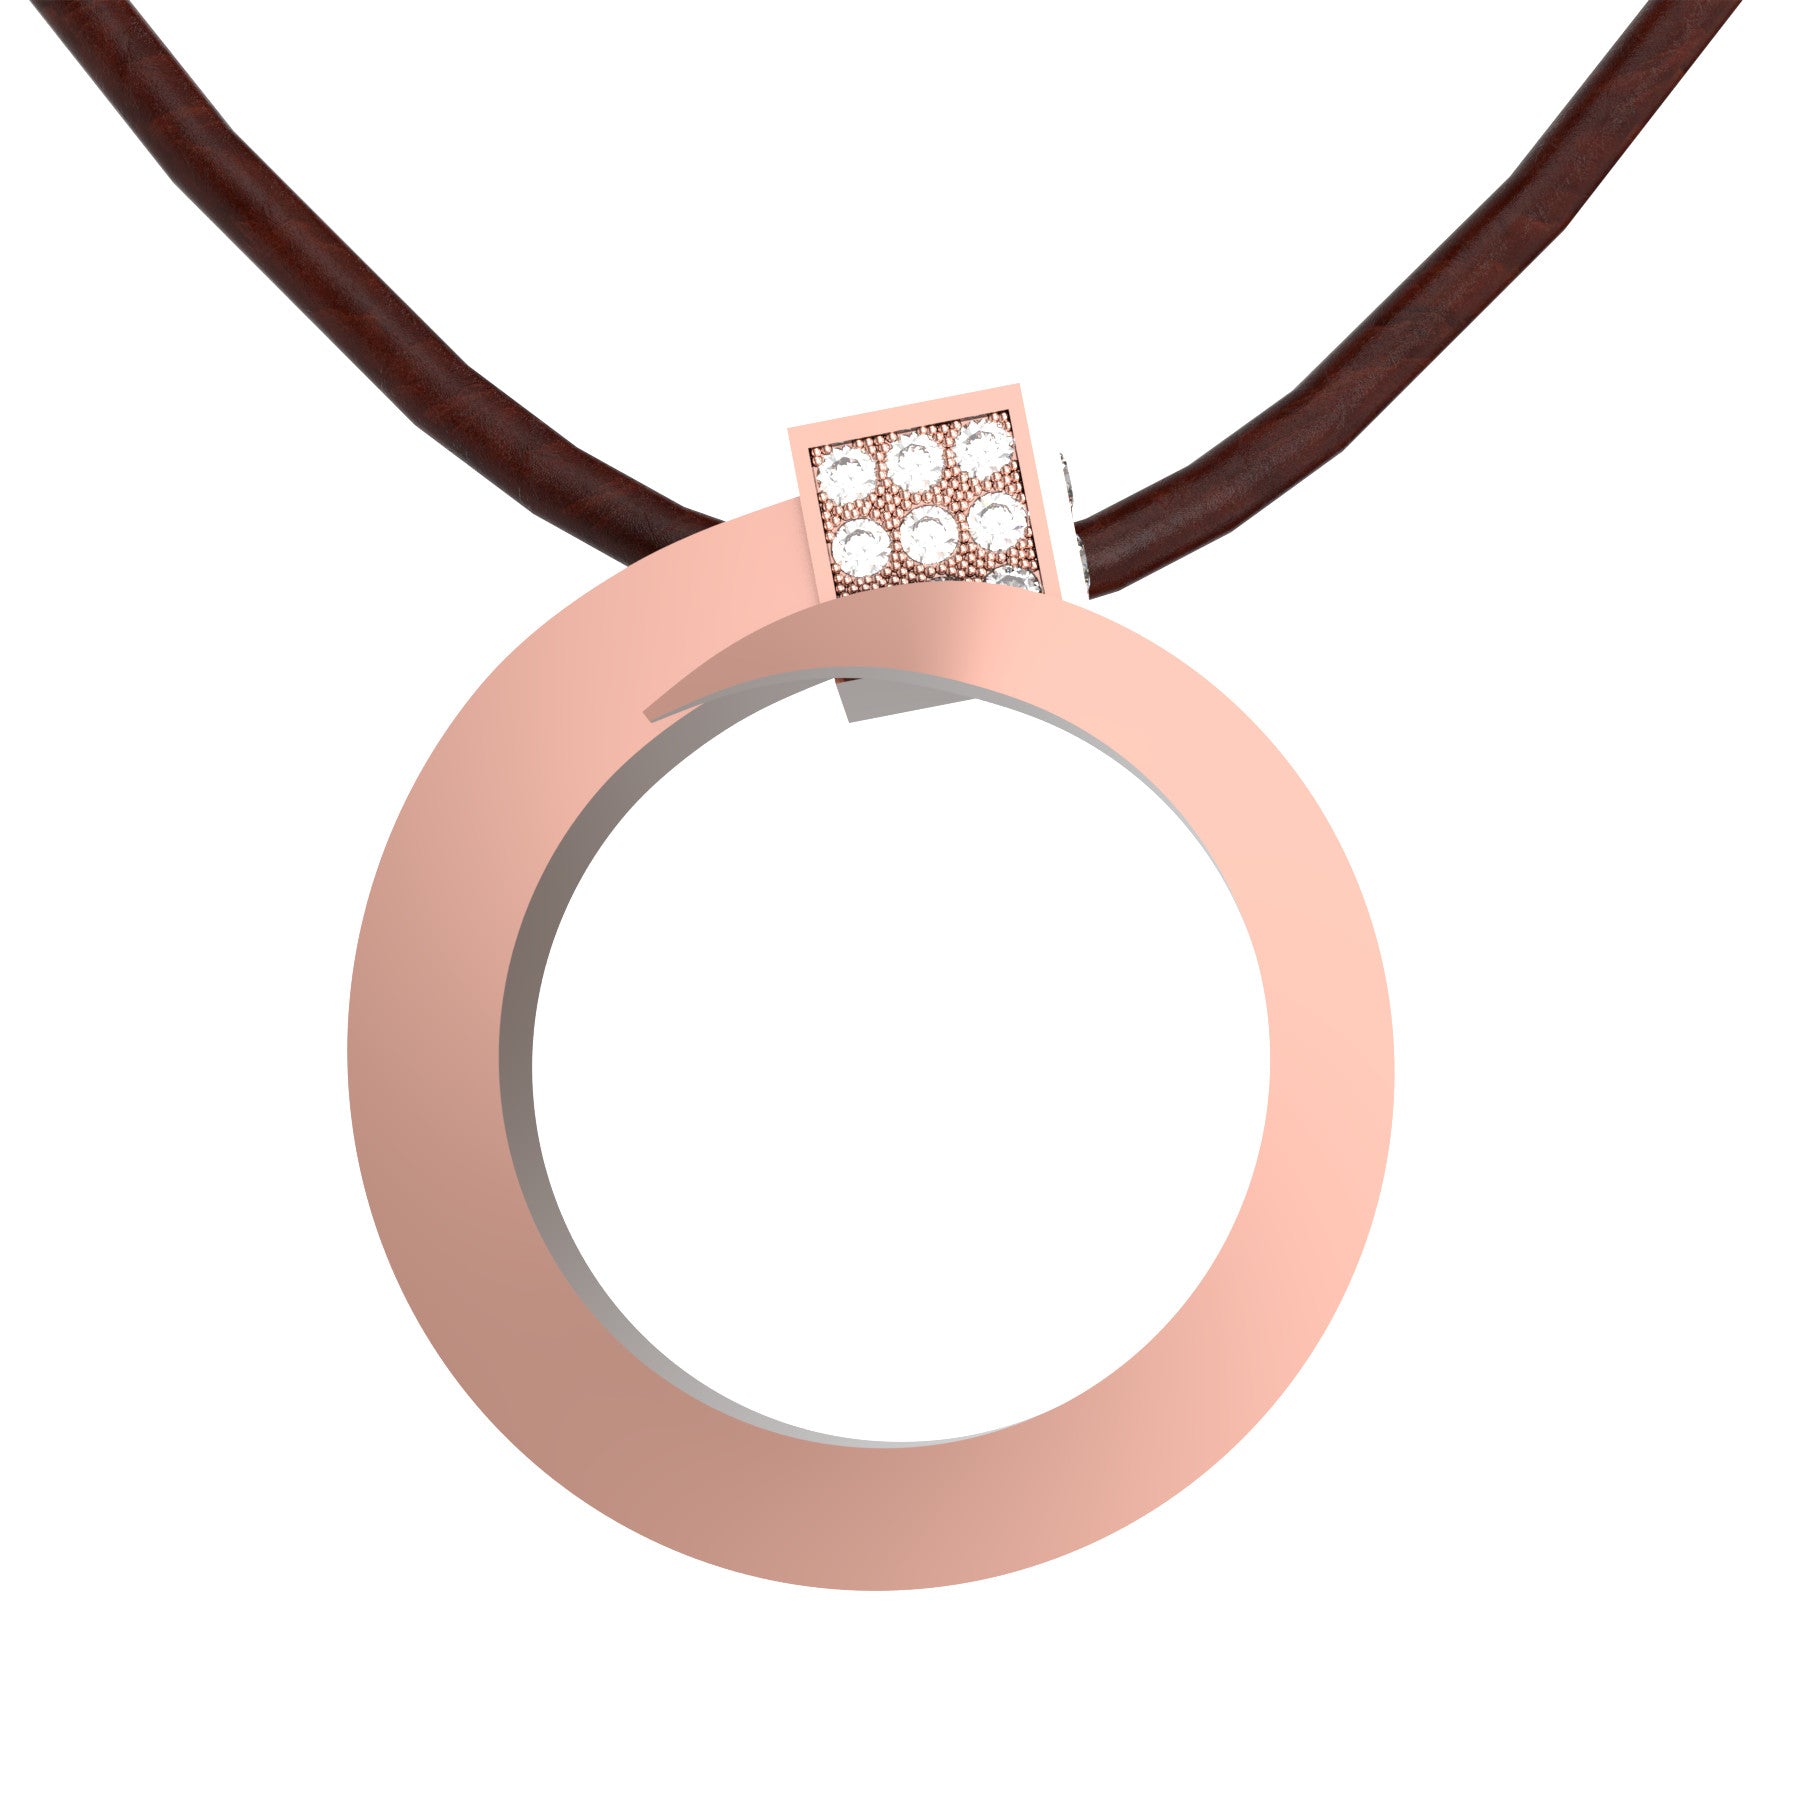 lucky nail pendant, natural round diamonds, 18 K pink gold, weight about 8,1 g (0.28 oz), width 8 mm max diameter 27,0 mm max